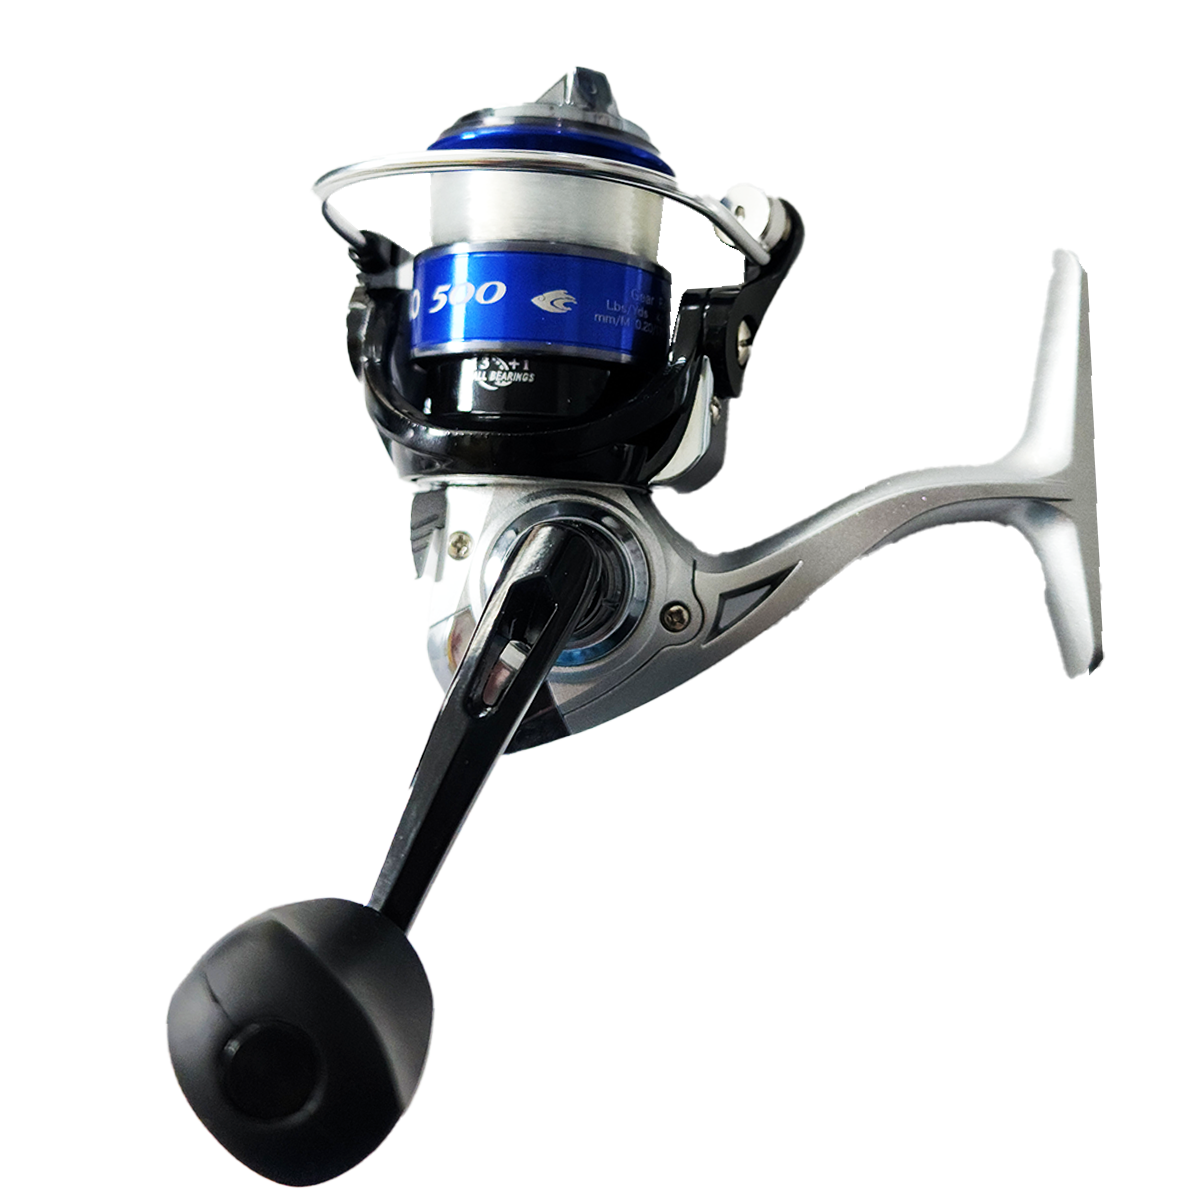 Cast Cray Lures Pro 500 Reel - Blue/Silver - Cast Cray Outdoors